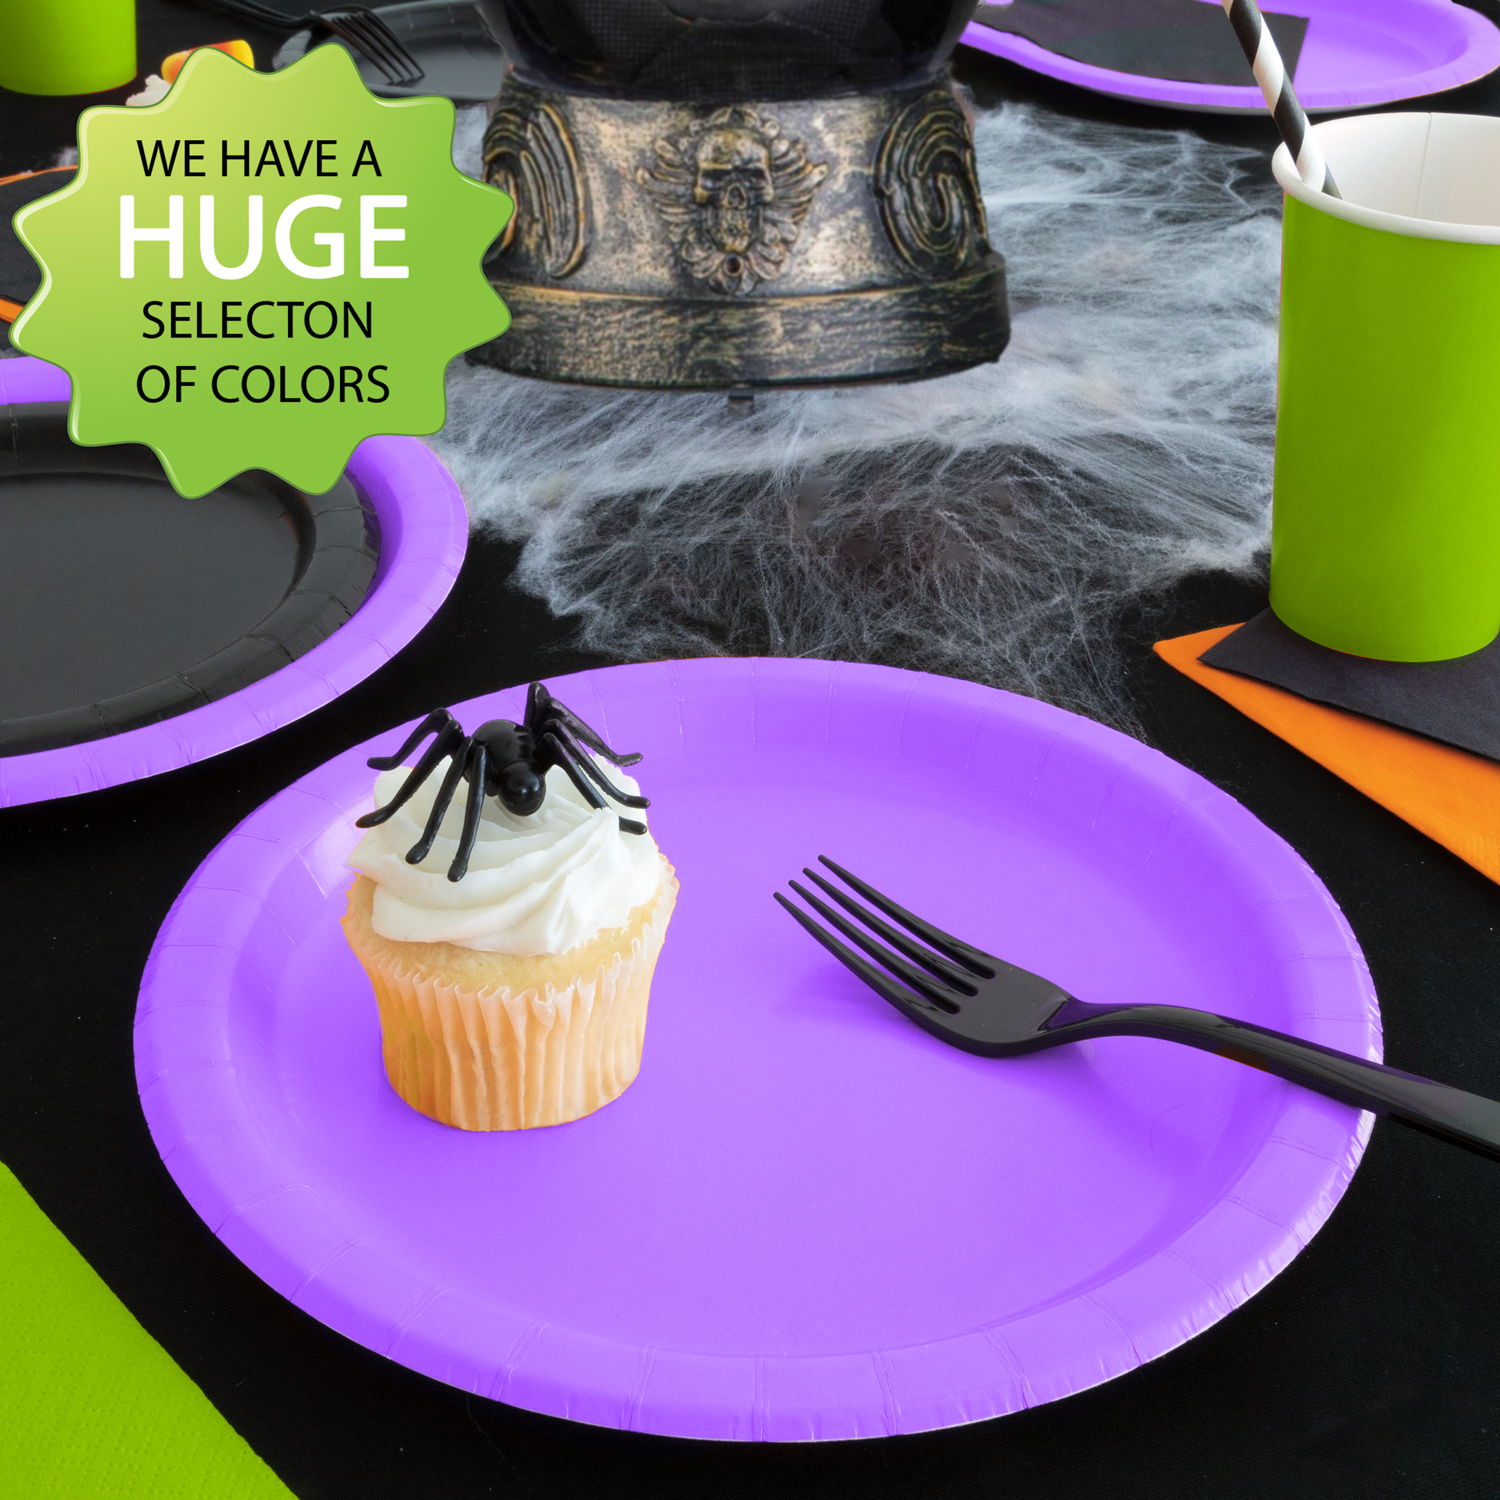 A Halloween themed solid color table setting with spooky decor and tableware in purple, orange, green, and black.